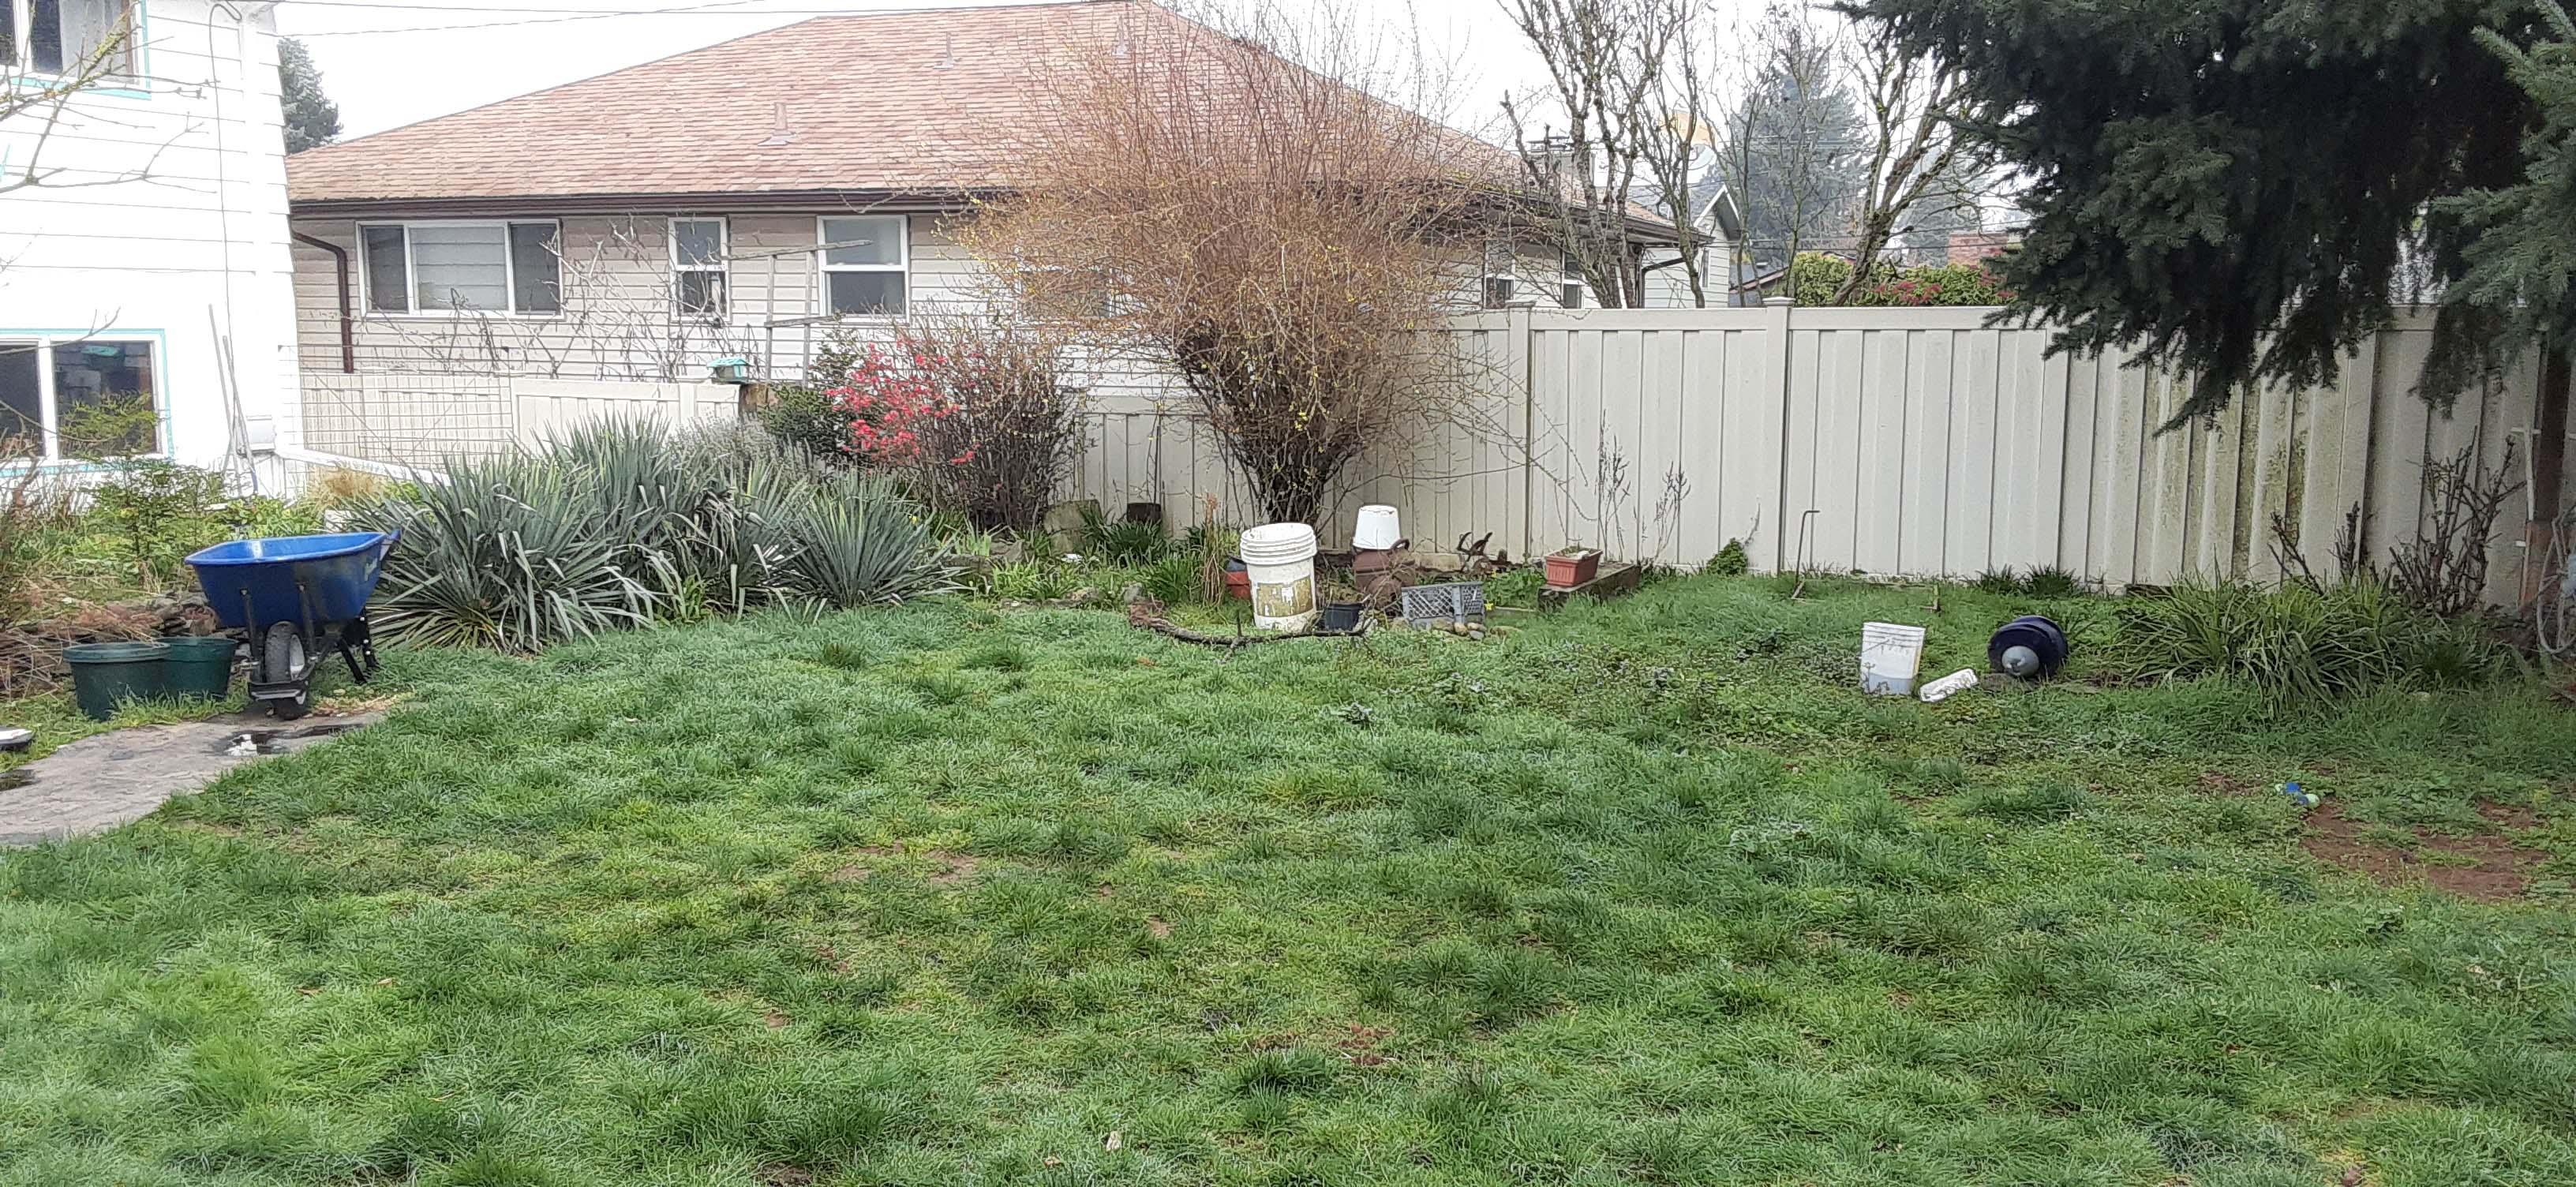 Backyard with dirt path, patchy grass and decorations strewn about